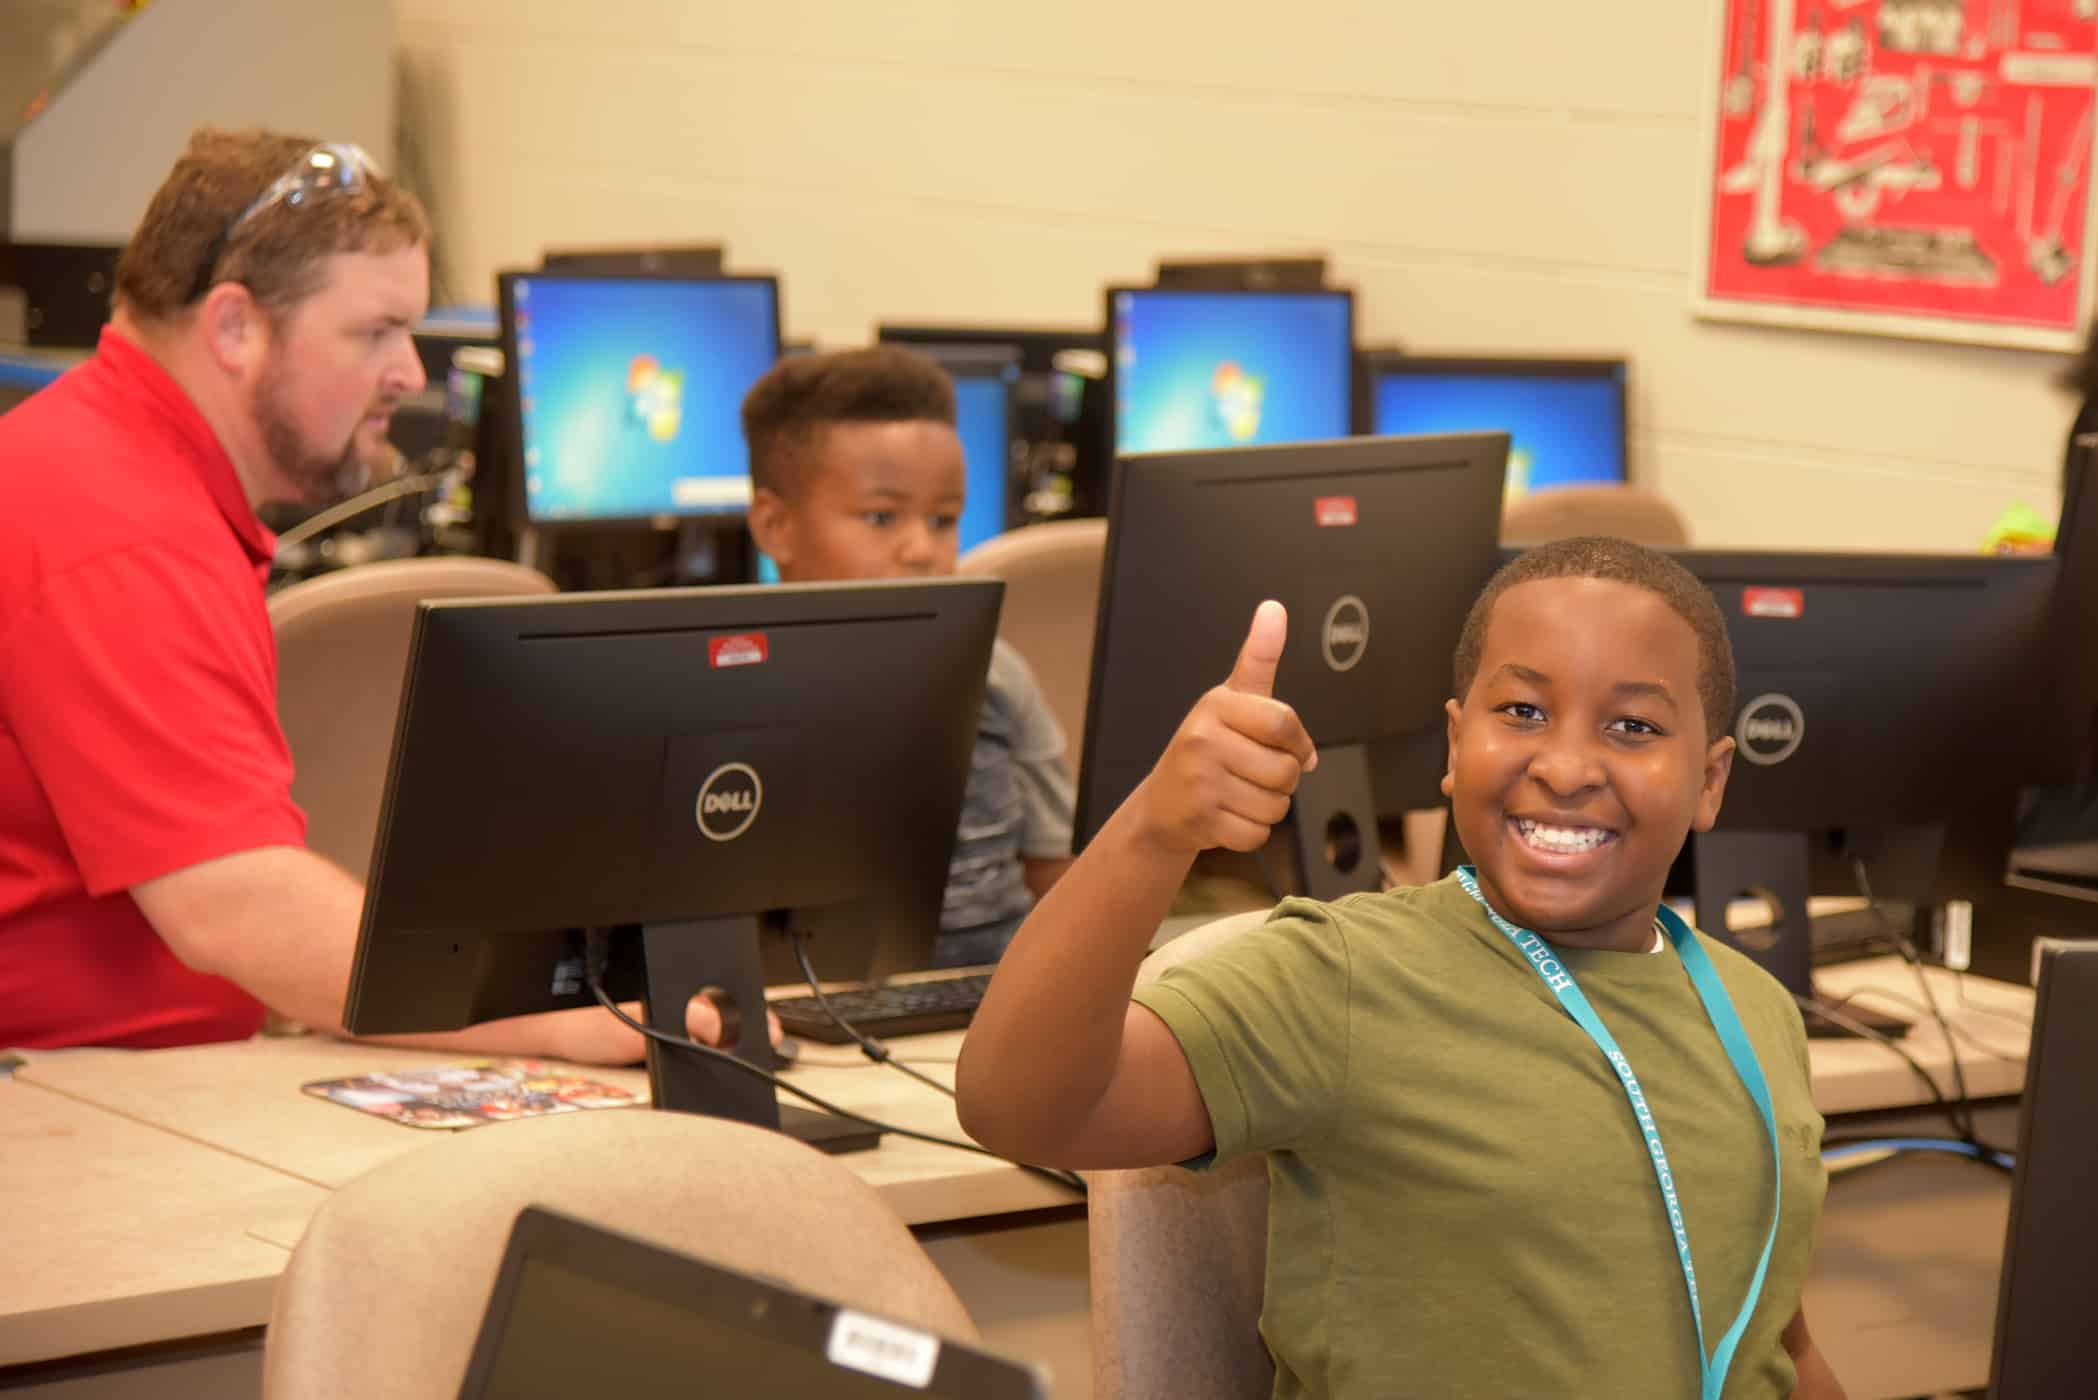 Kaylon Harvey, a seventh grader from Sumter County Middle School, gives a thumbs up during a session of the recent STEM camp while precision machining and manufacturing instructor Chad Brown helps a student design a 3D model in the background.